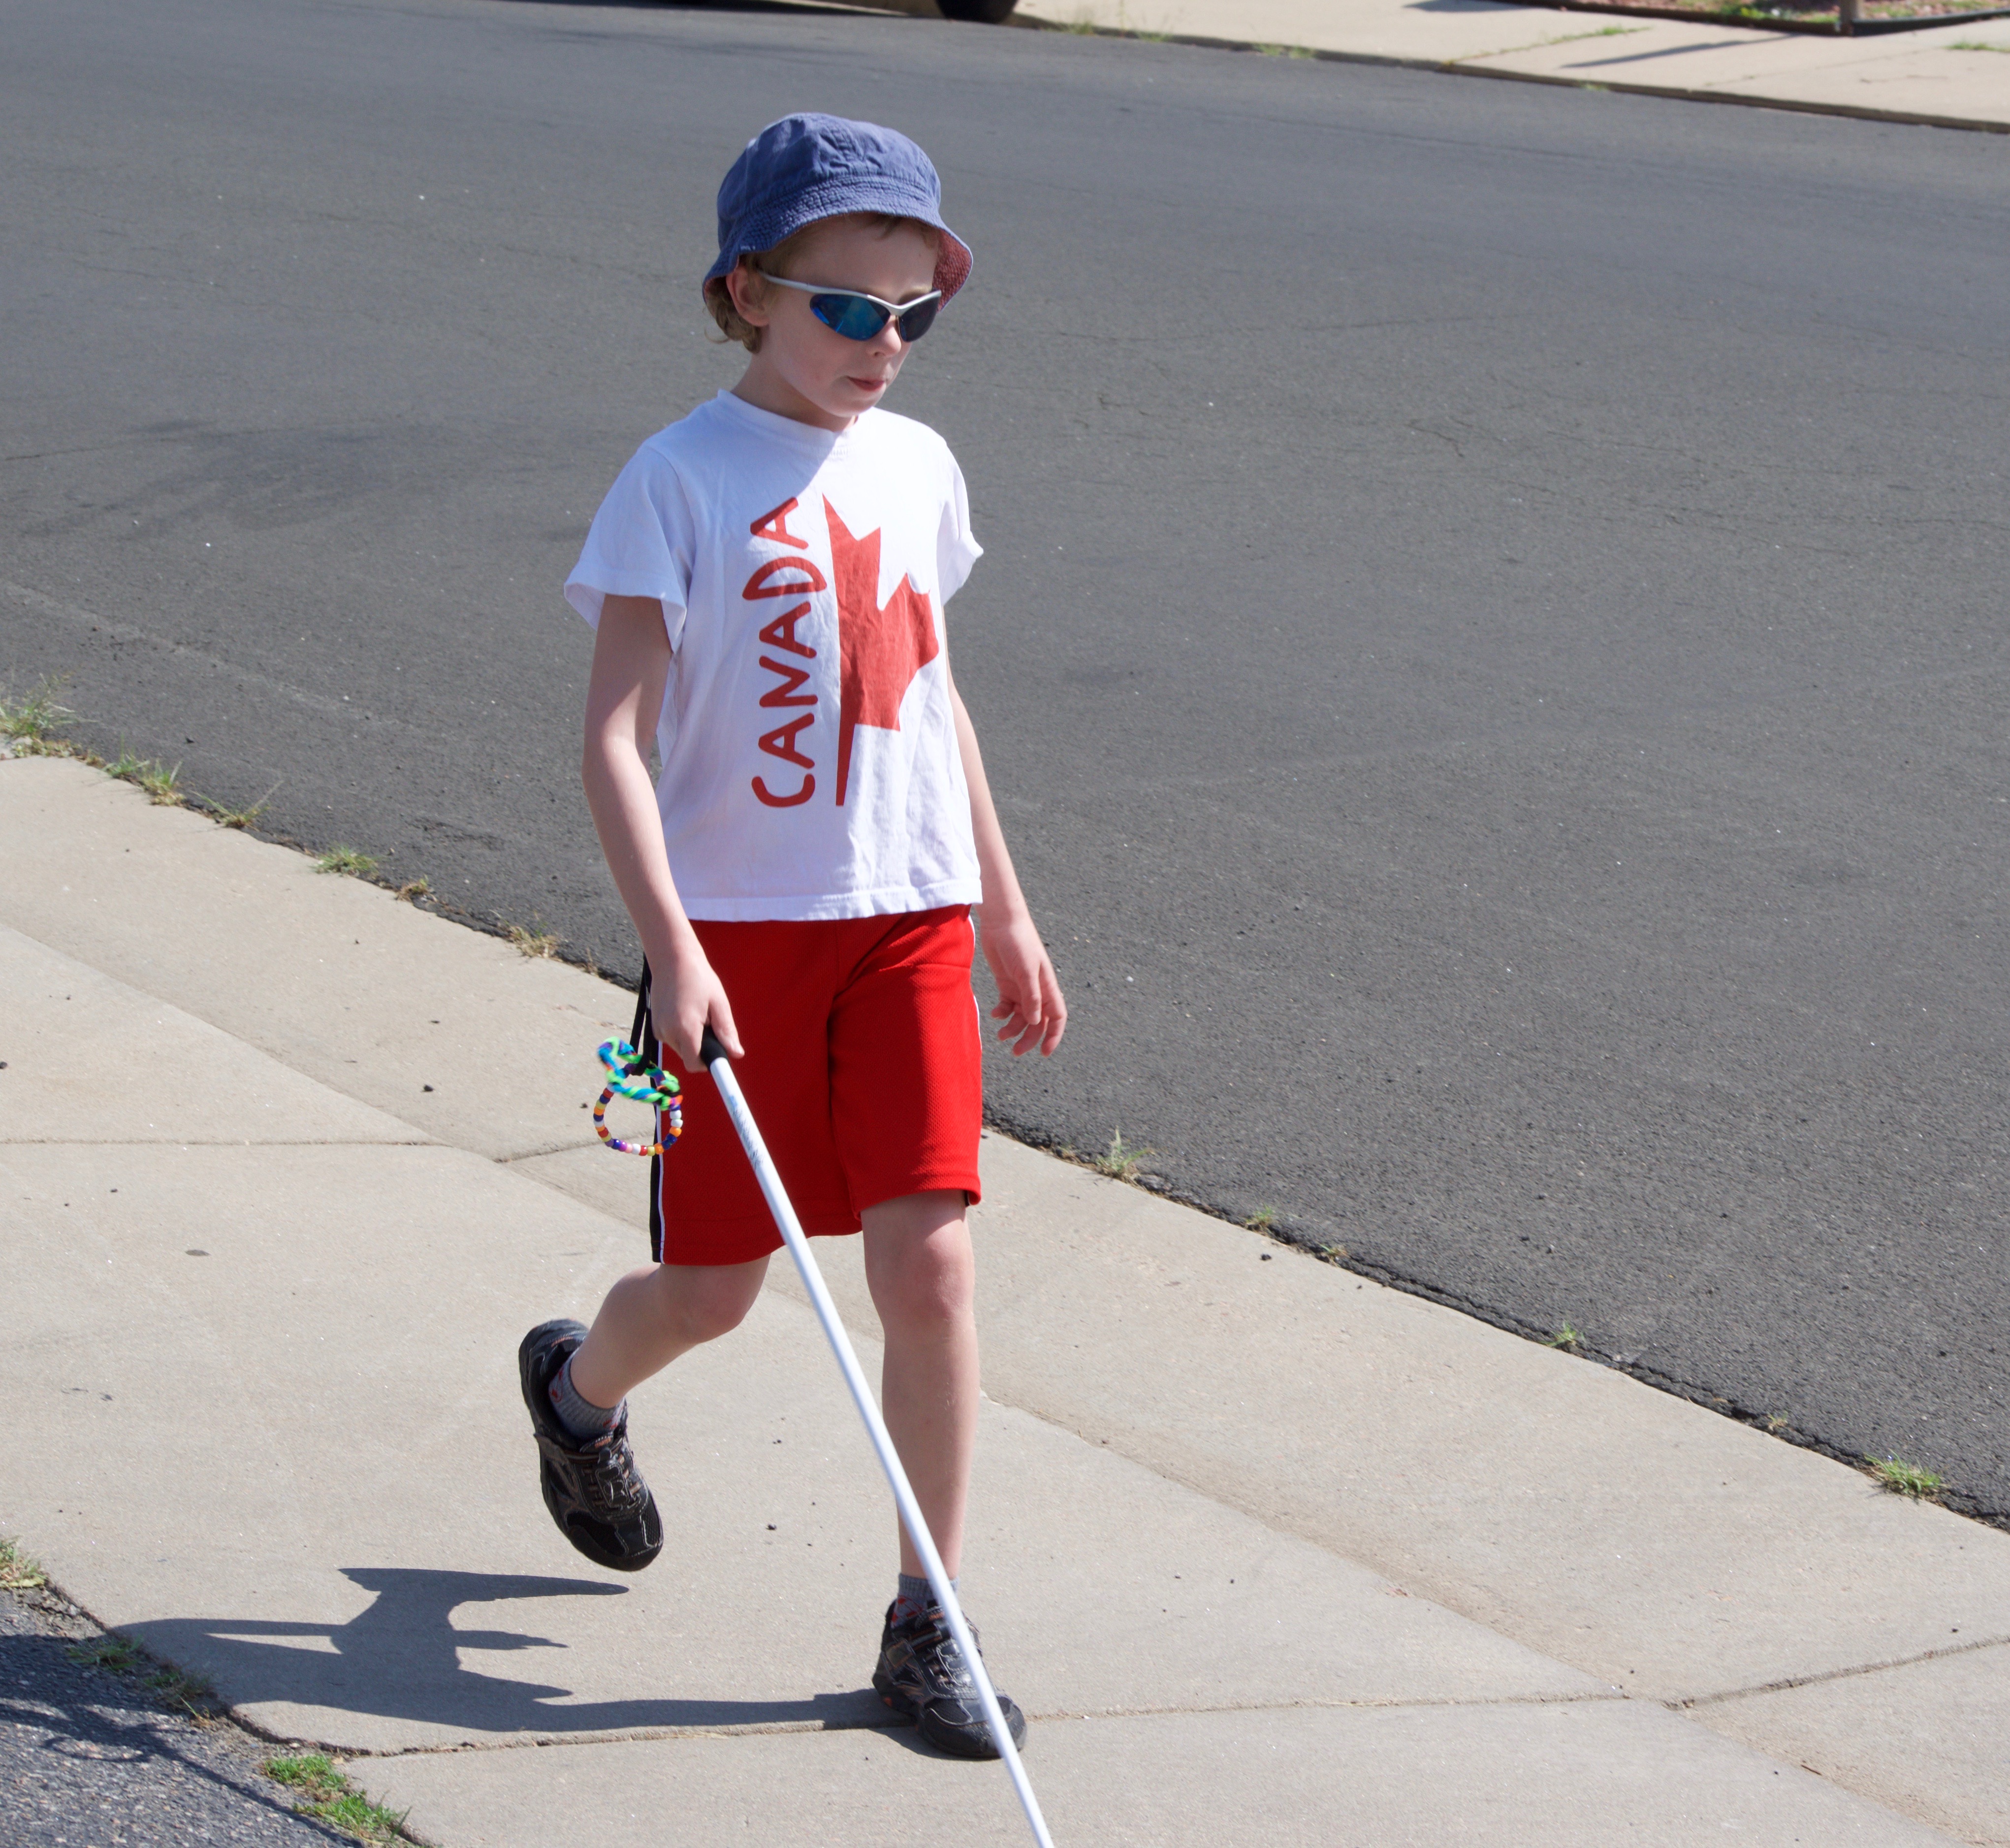 A young boy walking along the sidewalk using his white cane